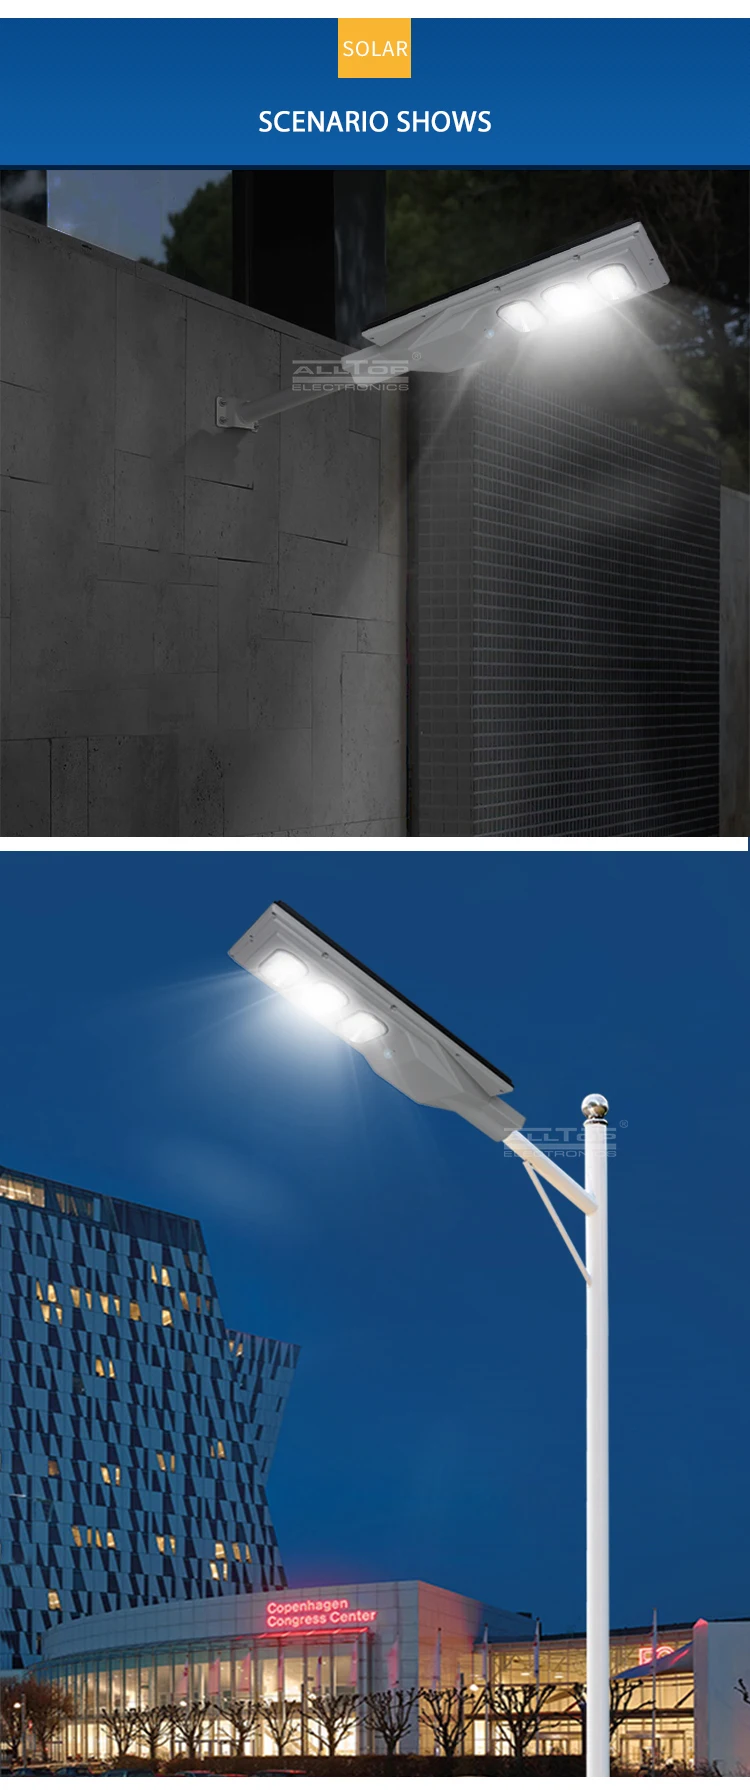 ALLTOP High power integrated remote control outdoor waterproof 30 60 90 120 150 watt all in one solar led street light